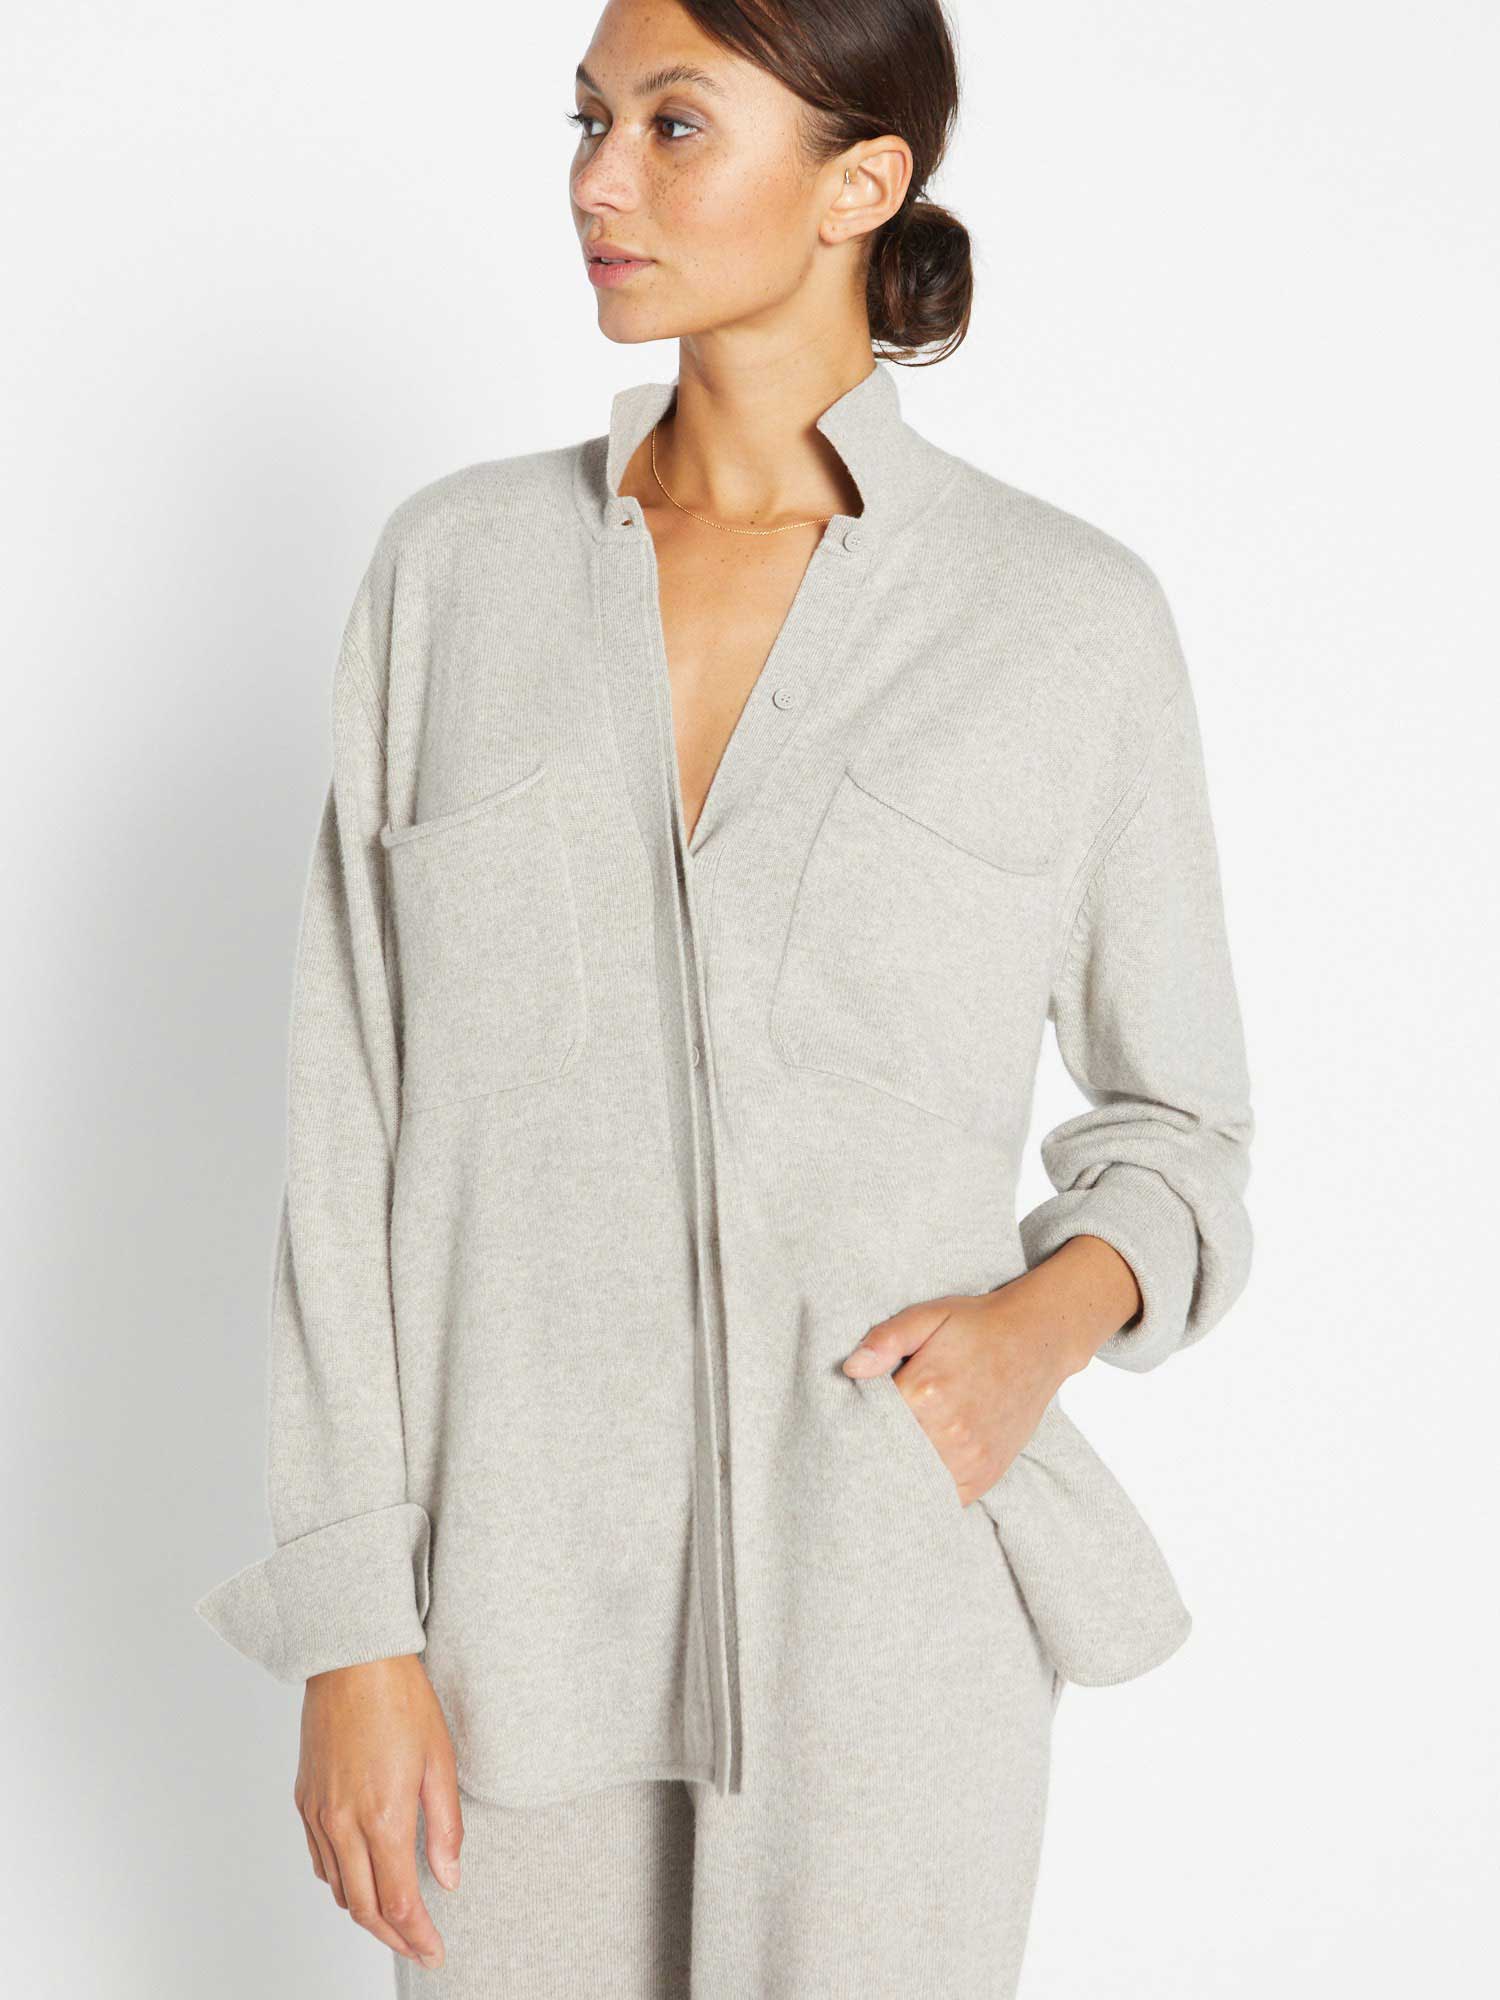 THE ANDRE LUXE CASHMERE SET